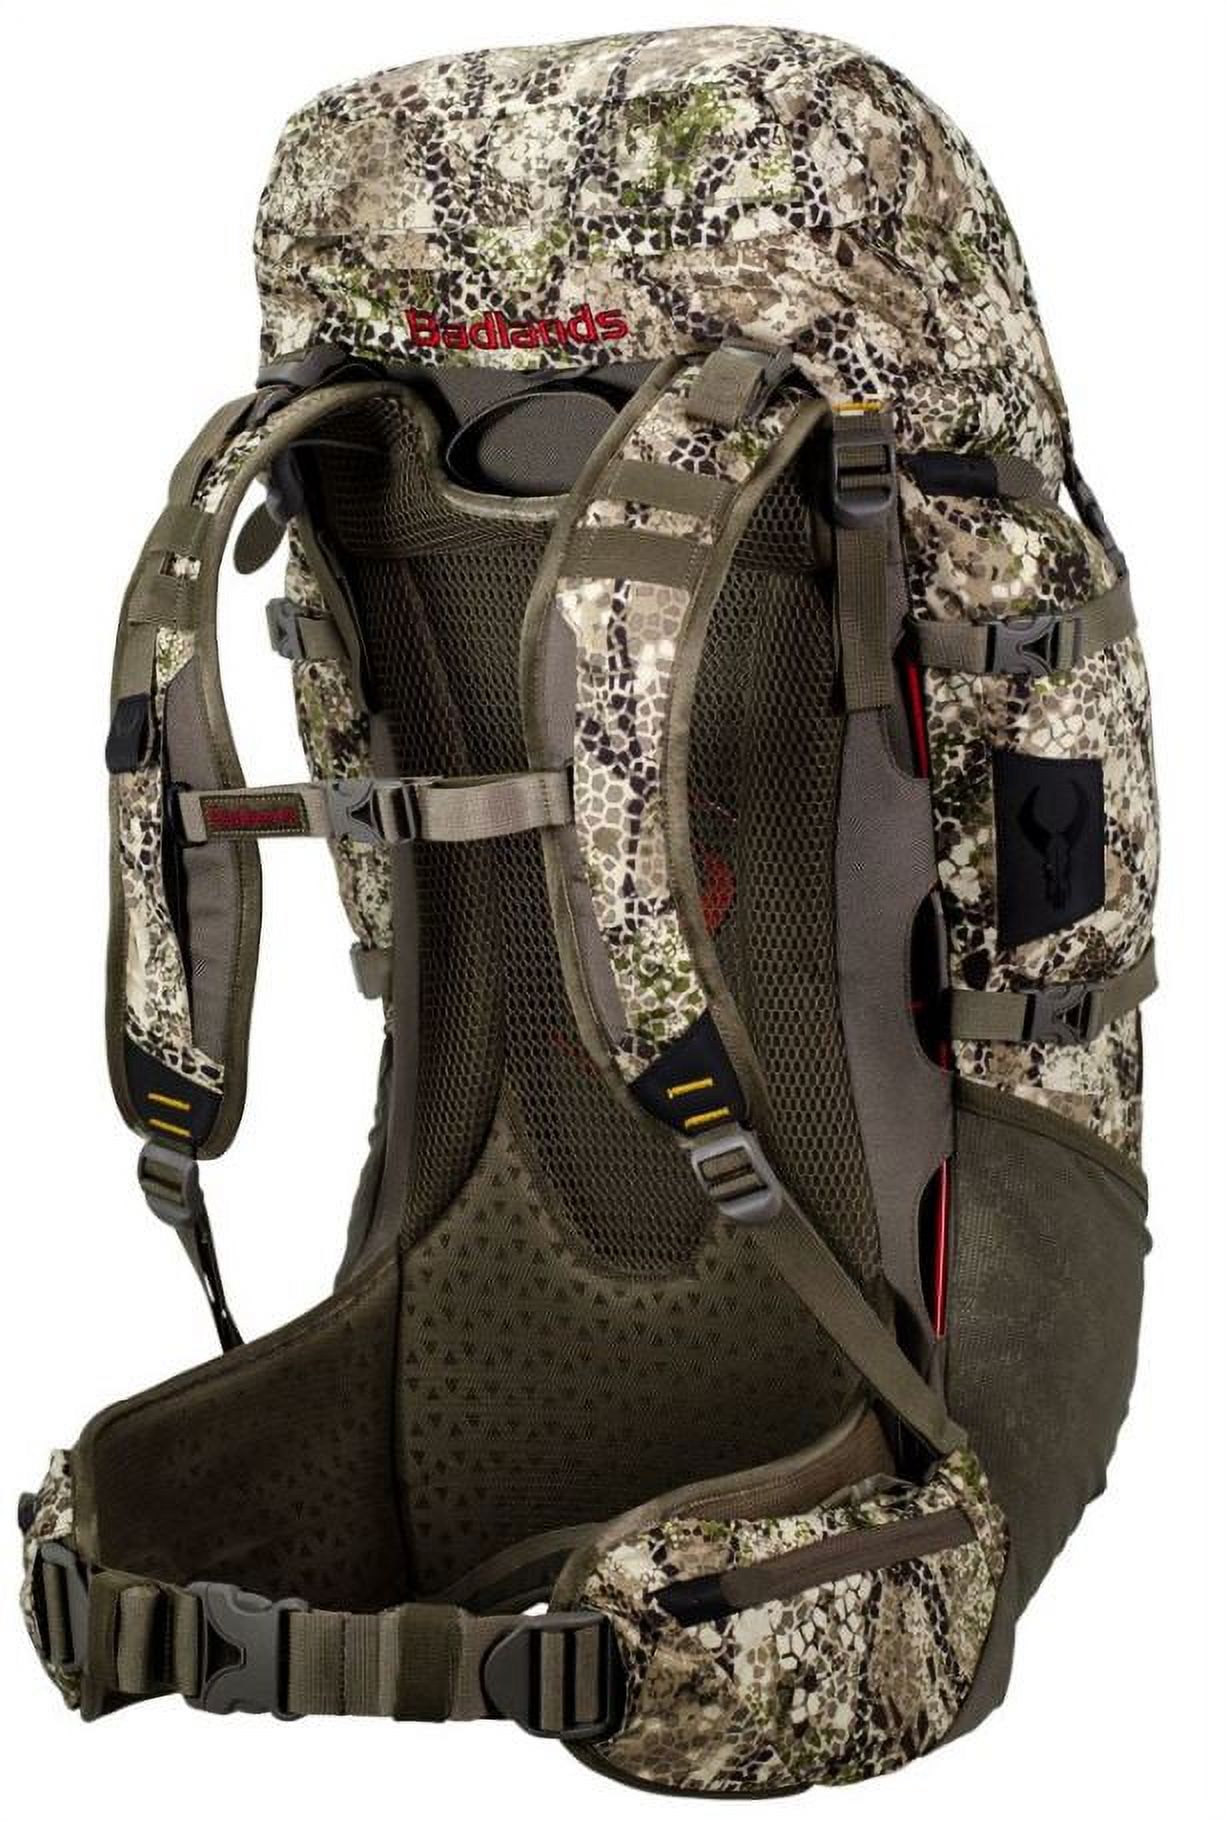 Badlands "Sacrifice LS" Ultra-Light Hypervent Hunting Pack, Approach Camo - image 2 of 3